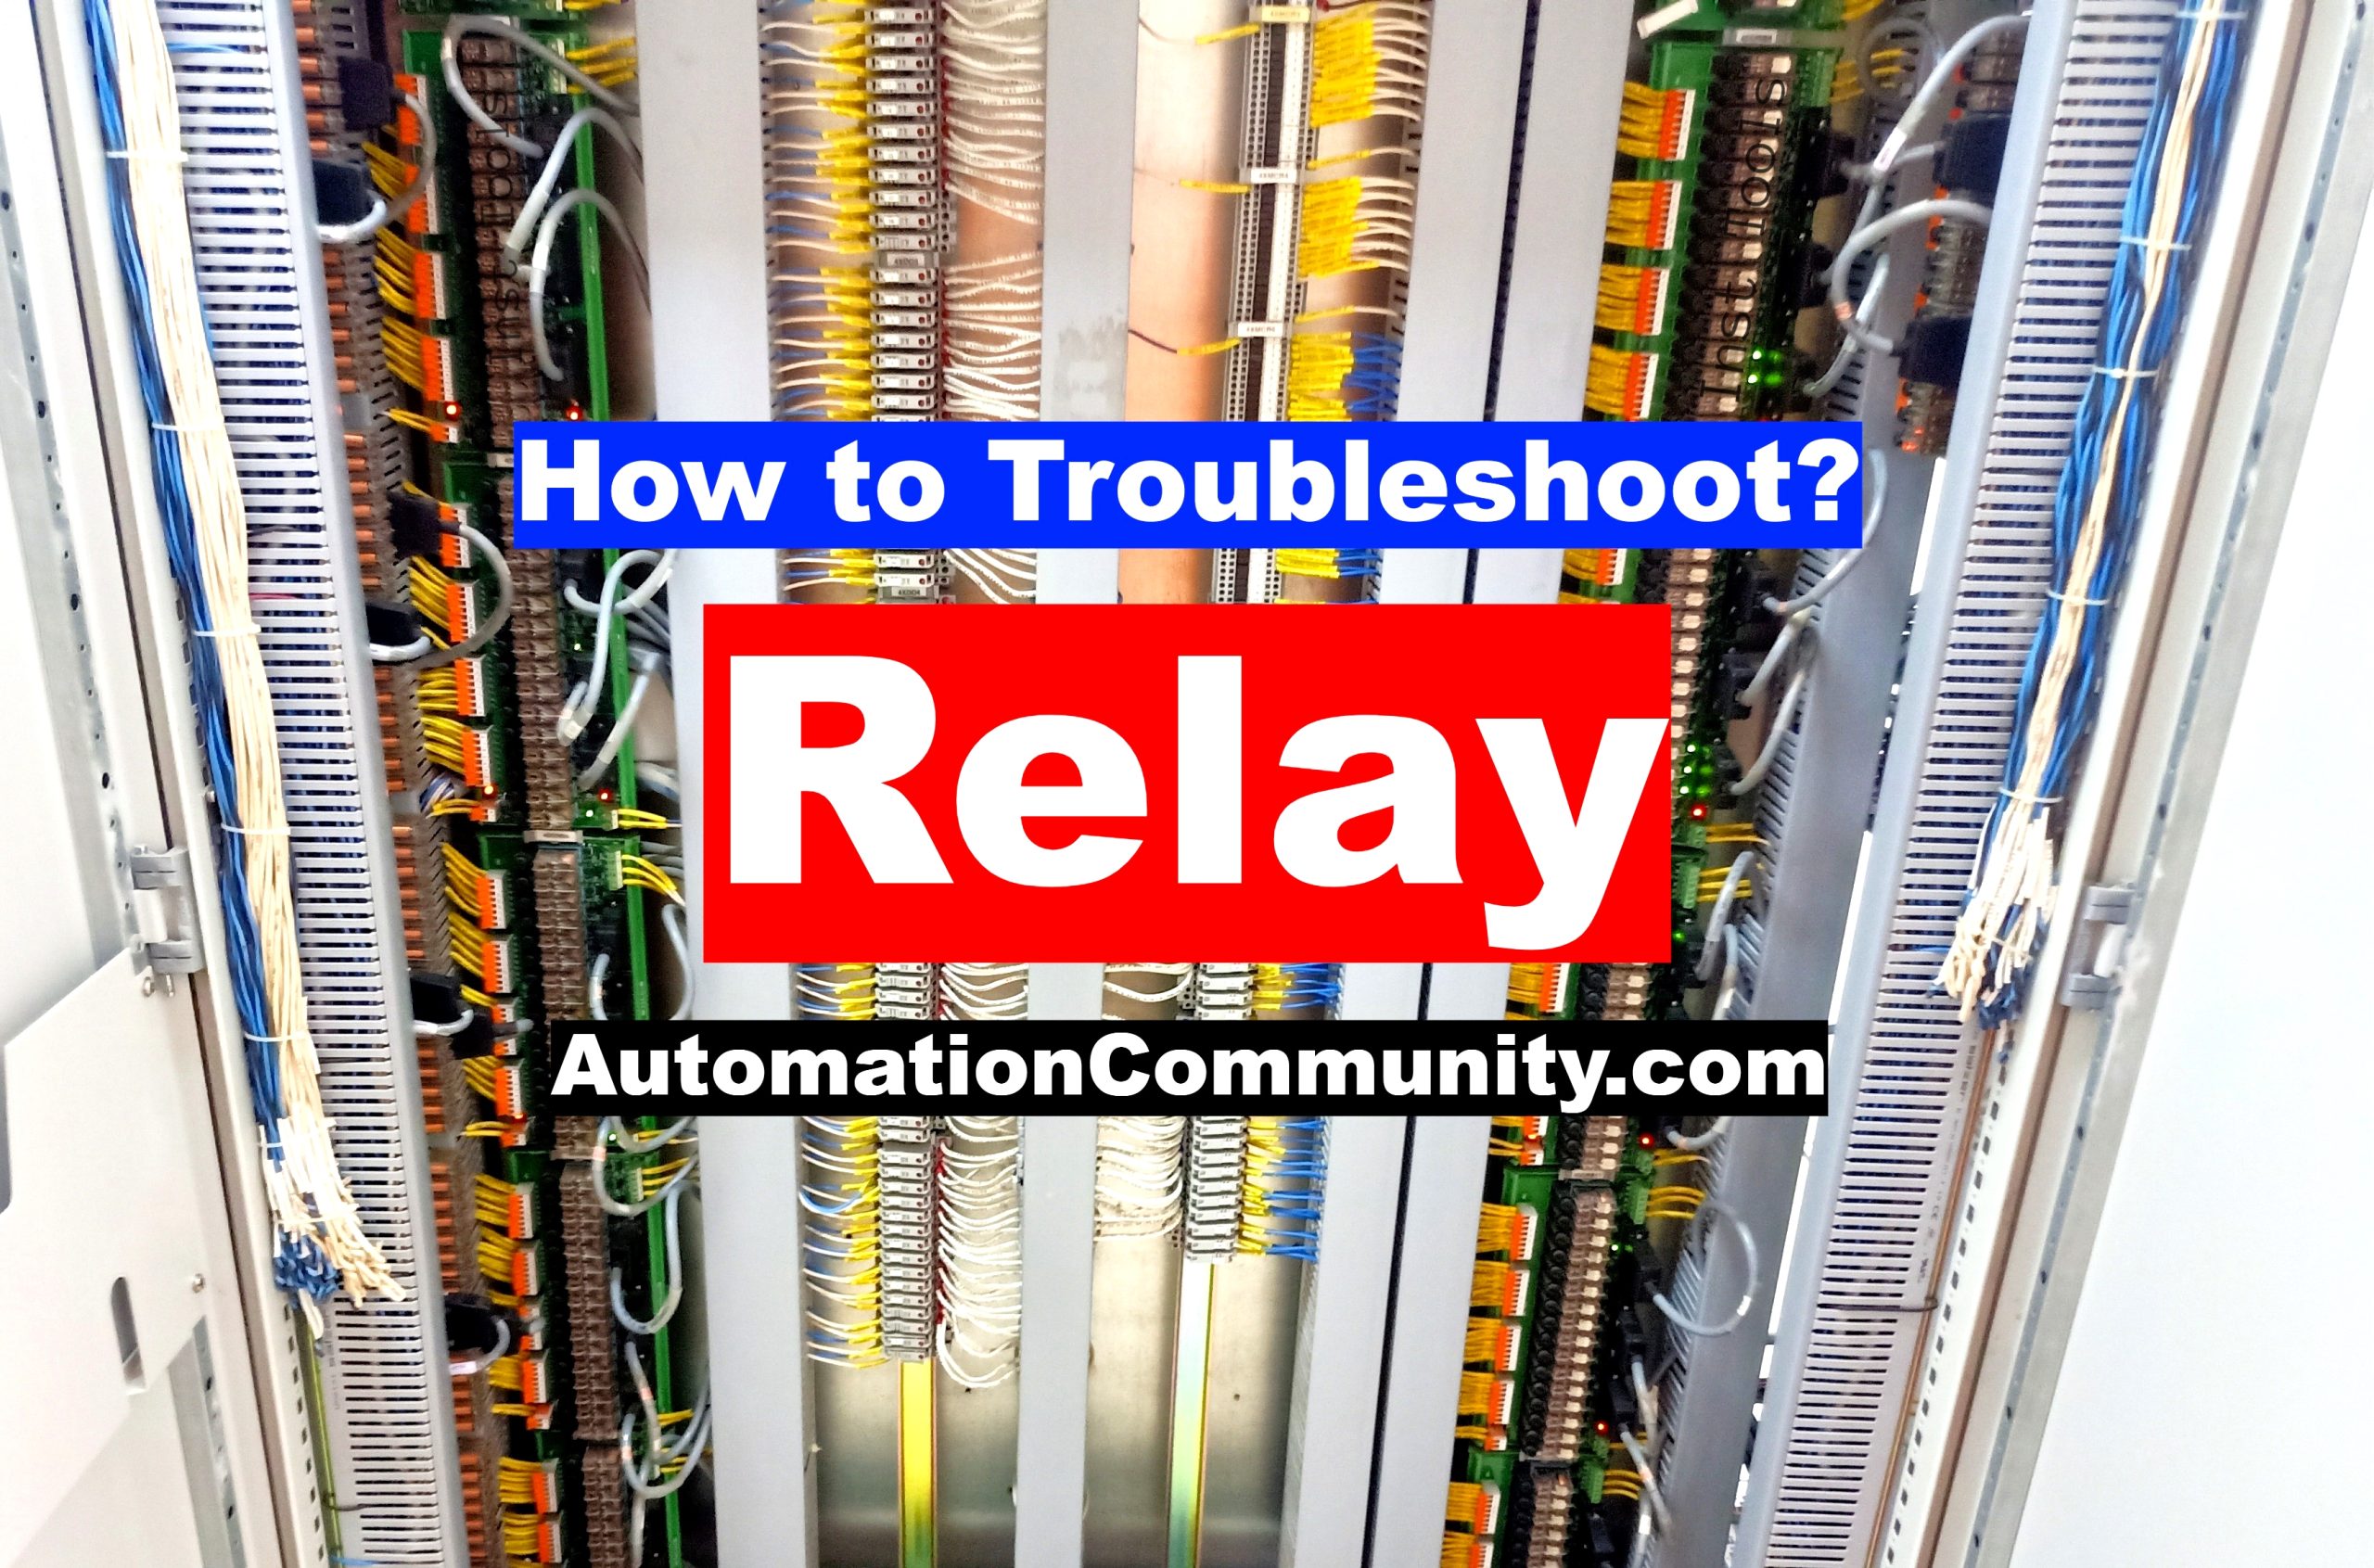 How to Troubleshoot a Relay